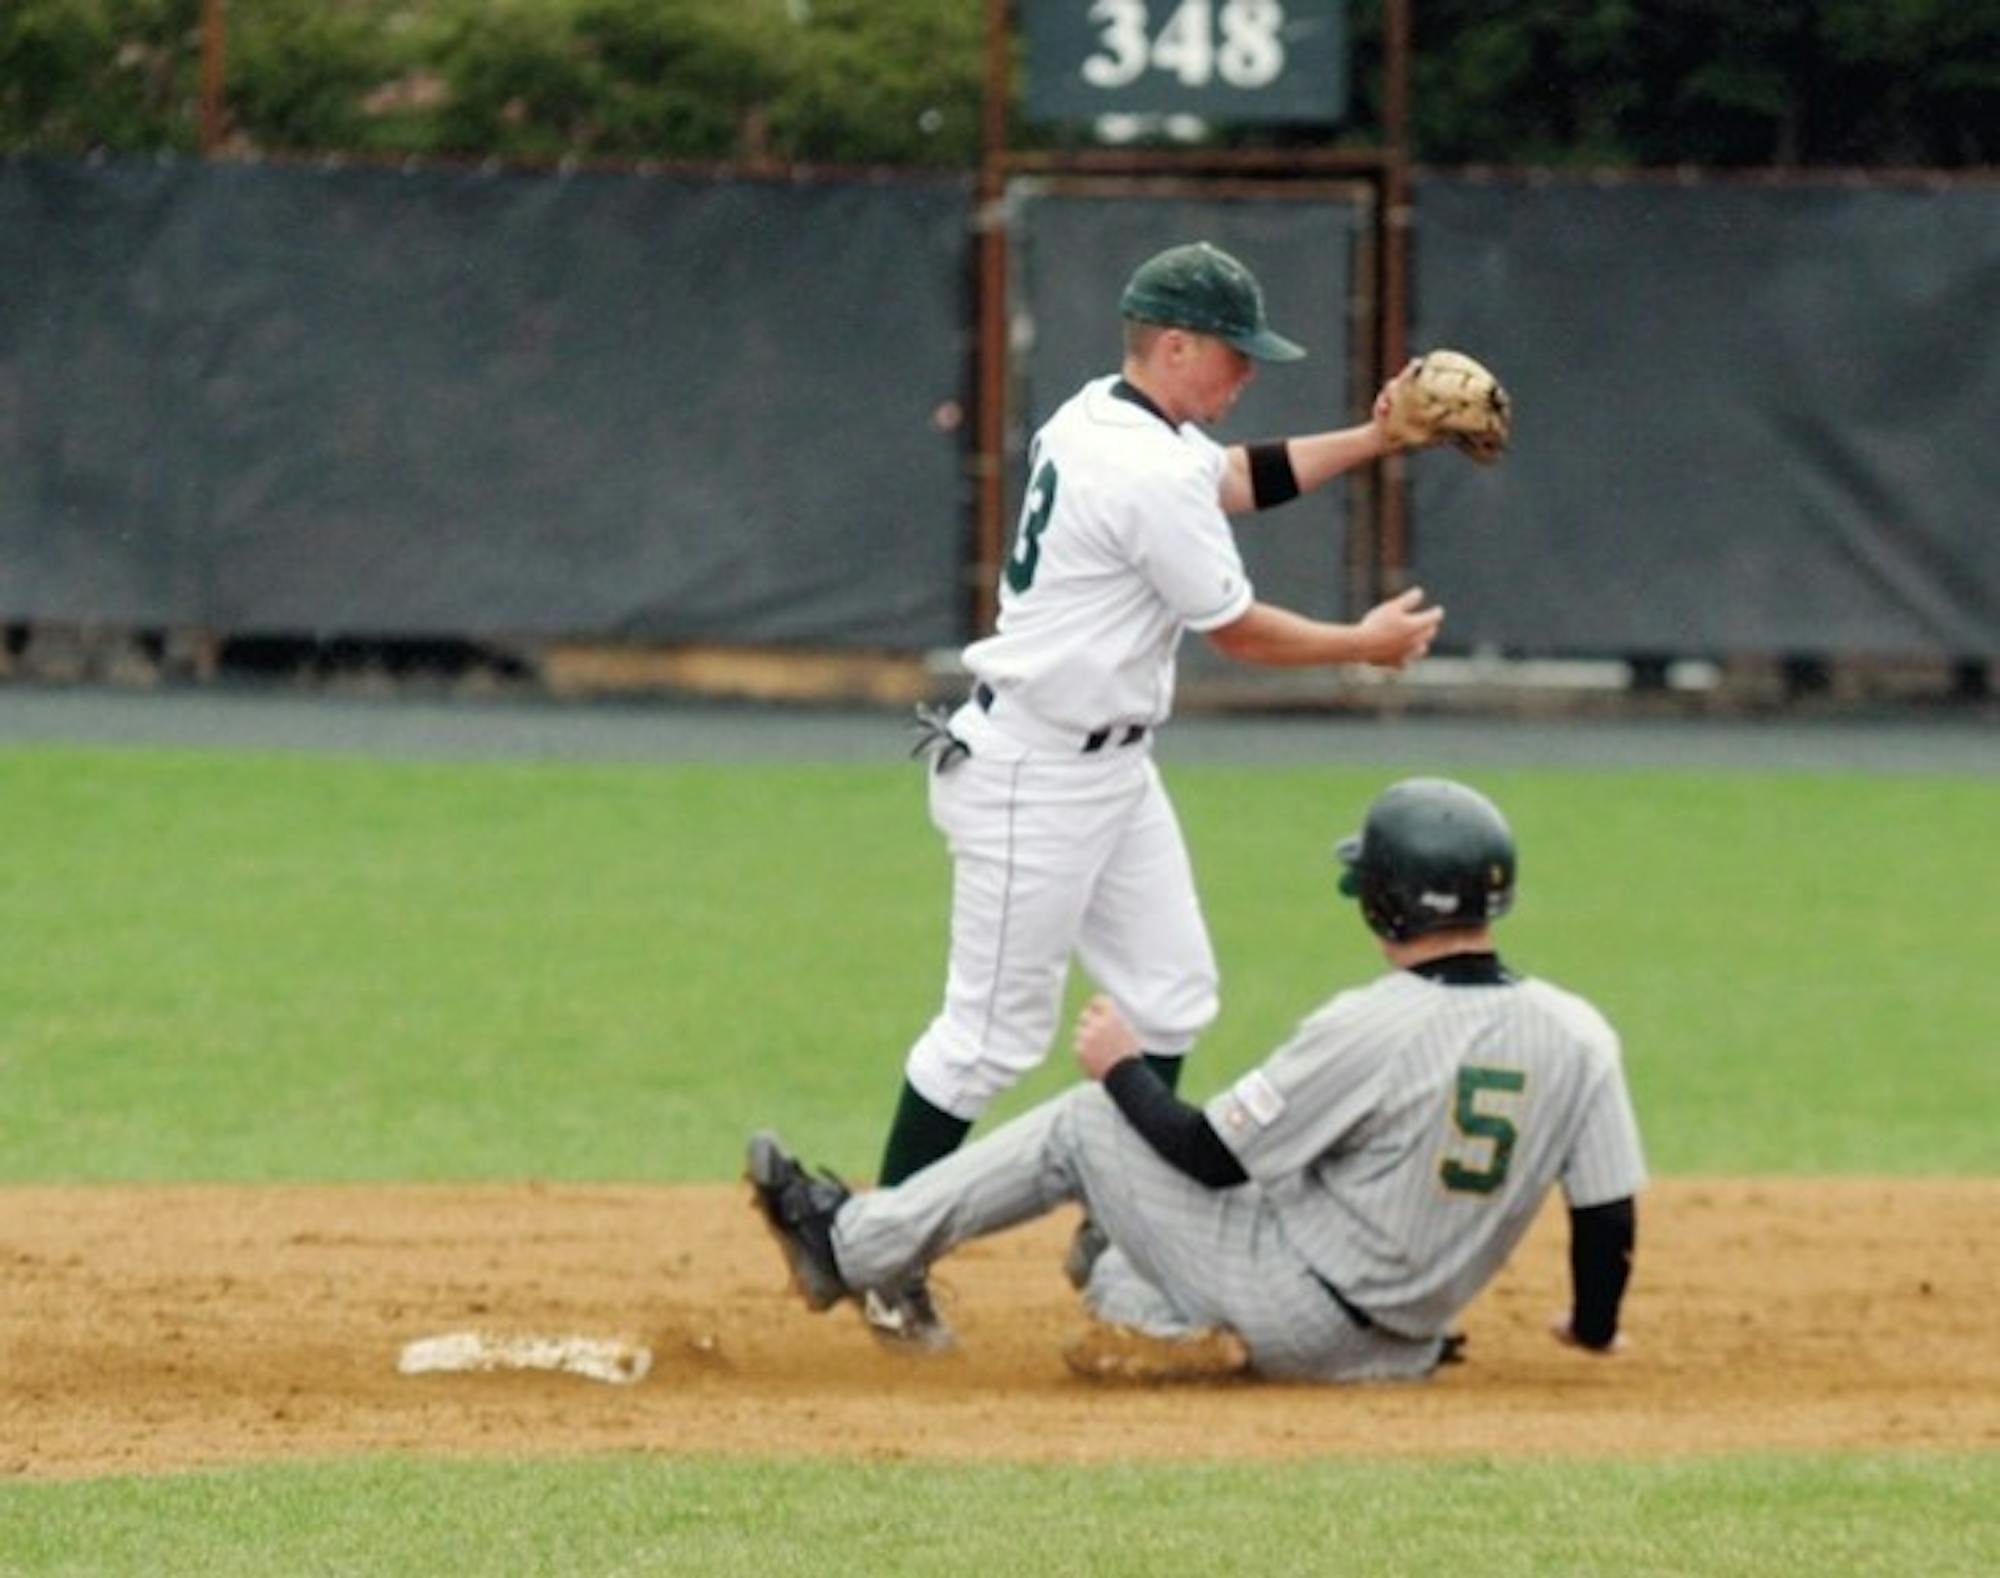 The Big Green overcame a five-run deficit to edge Vermont 6-5 Tuesday.